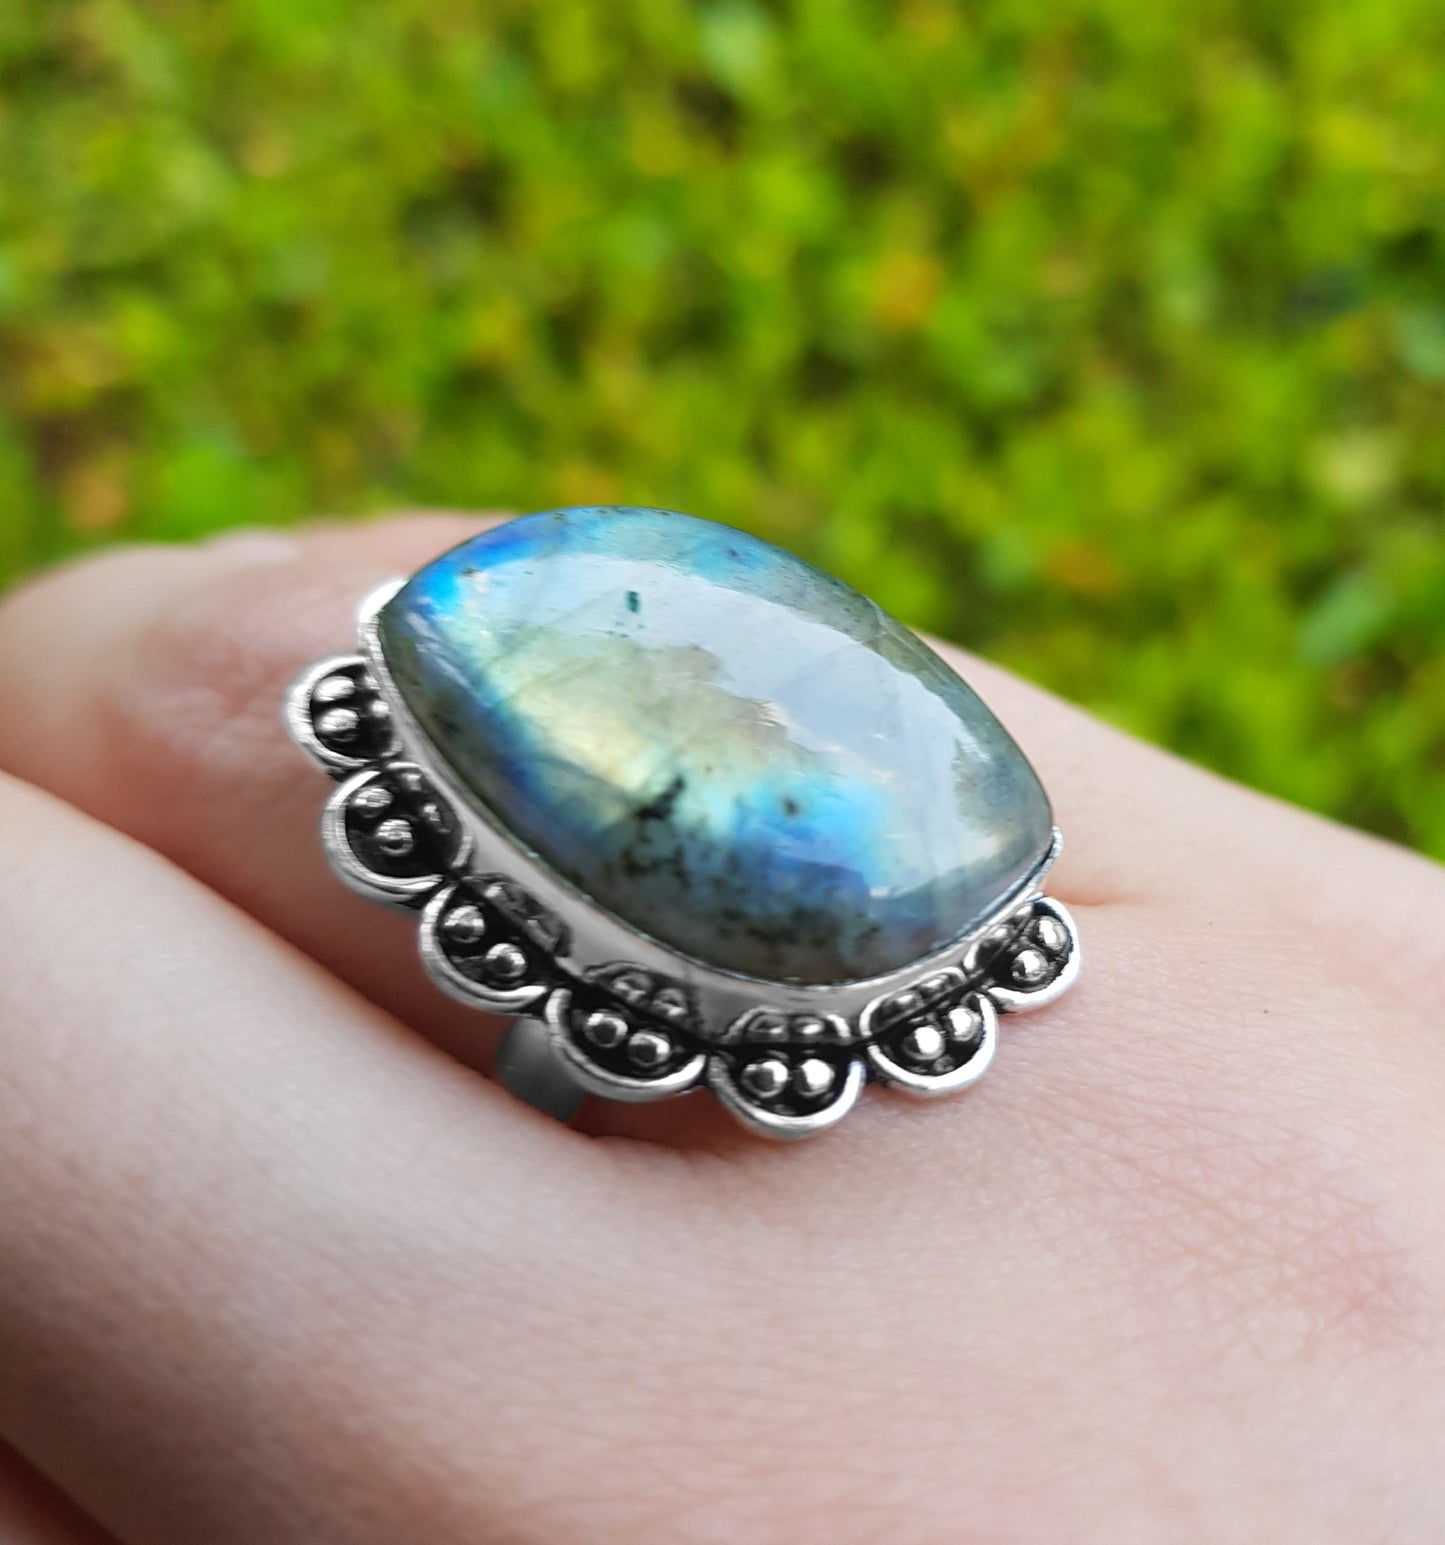 Labradorite Ring Size US 8 3/4 In Sterling Silver Crystal Ring Boho Rings Unique Gift For Her Ethnic Ring GypsyJewelry